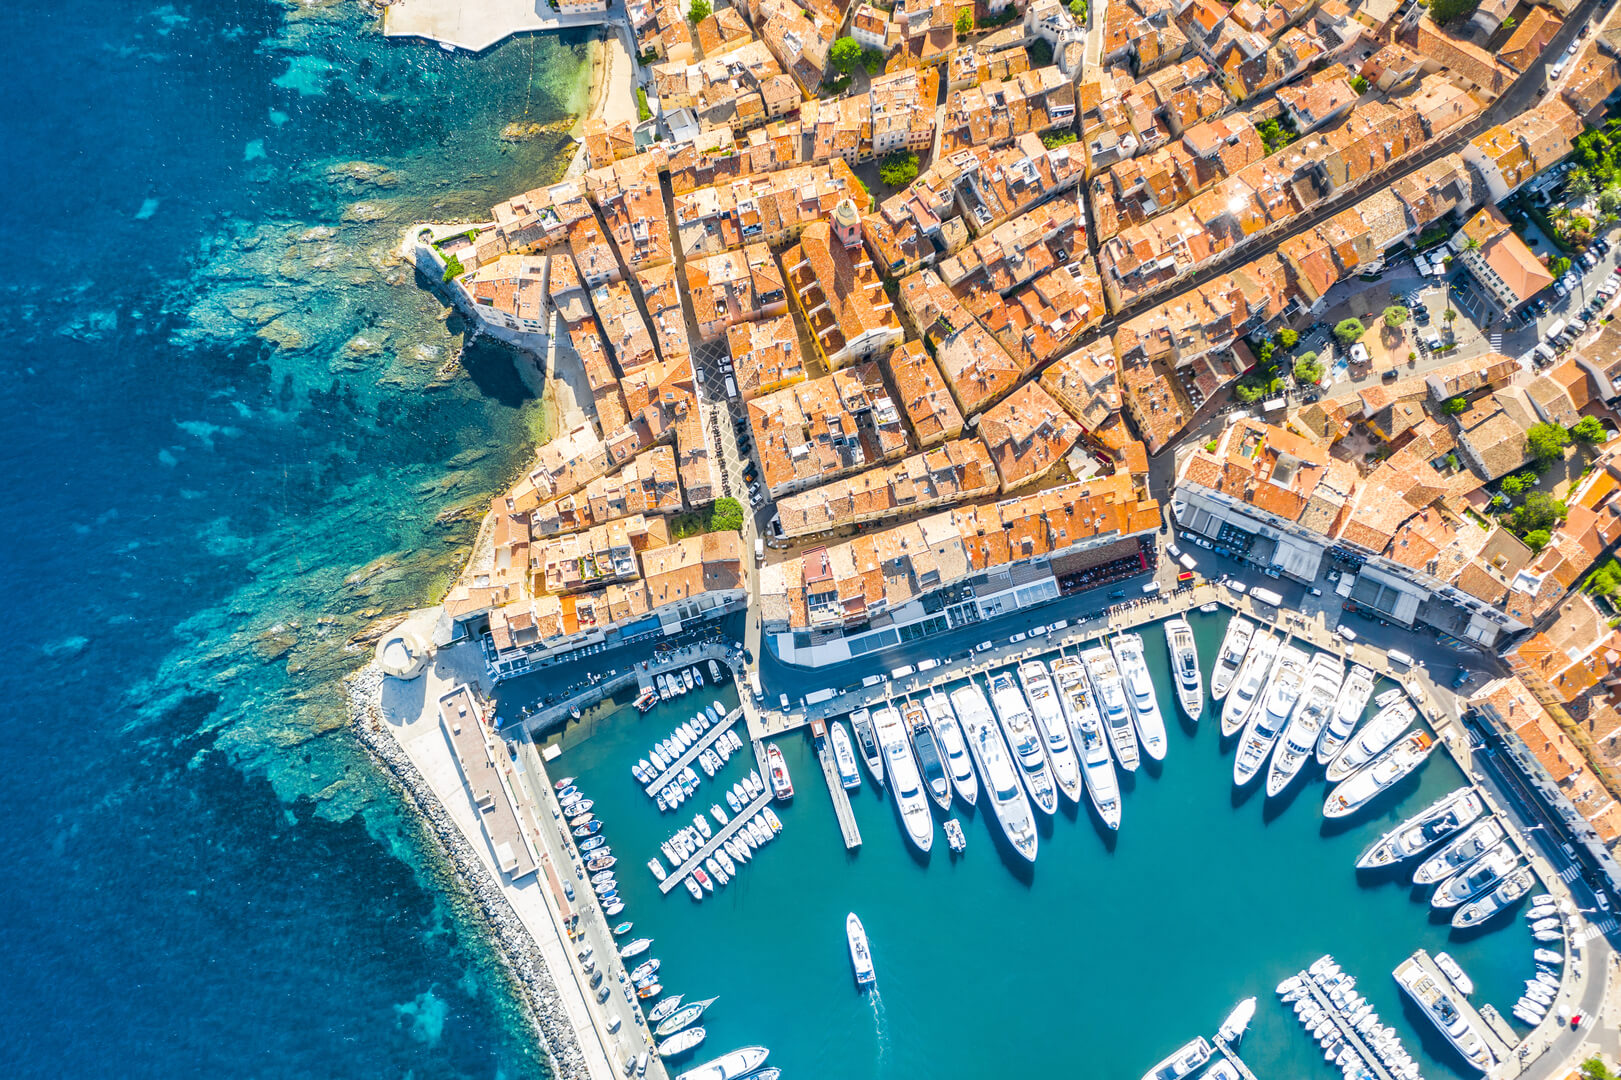 View of the city of Saint-Tropez, Provence, Côte d'Azur, popular destination for travel in Europe